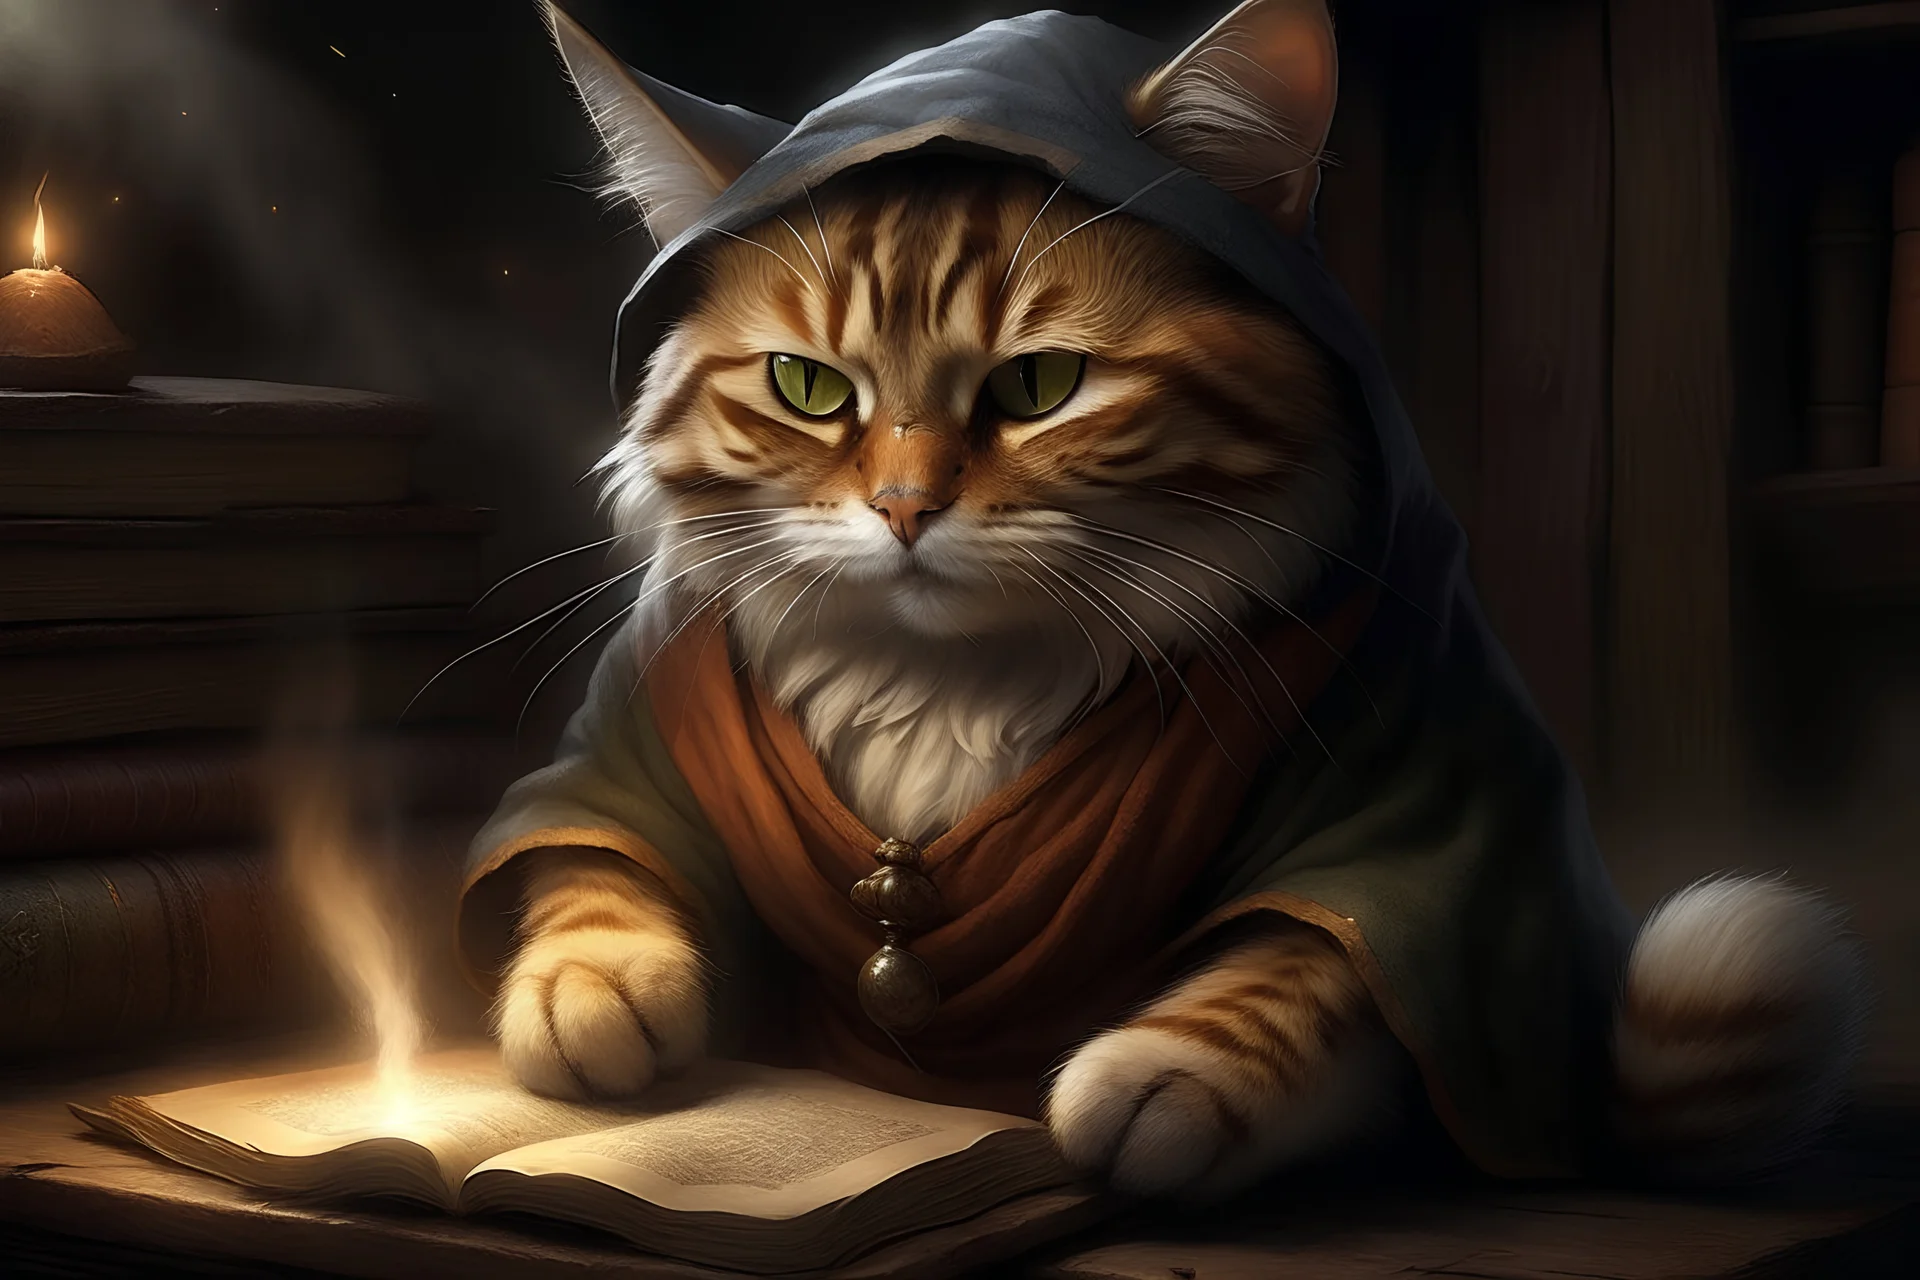 a wise cat forging hardly